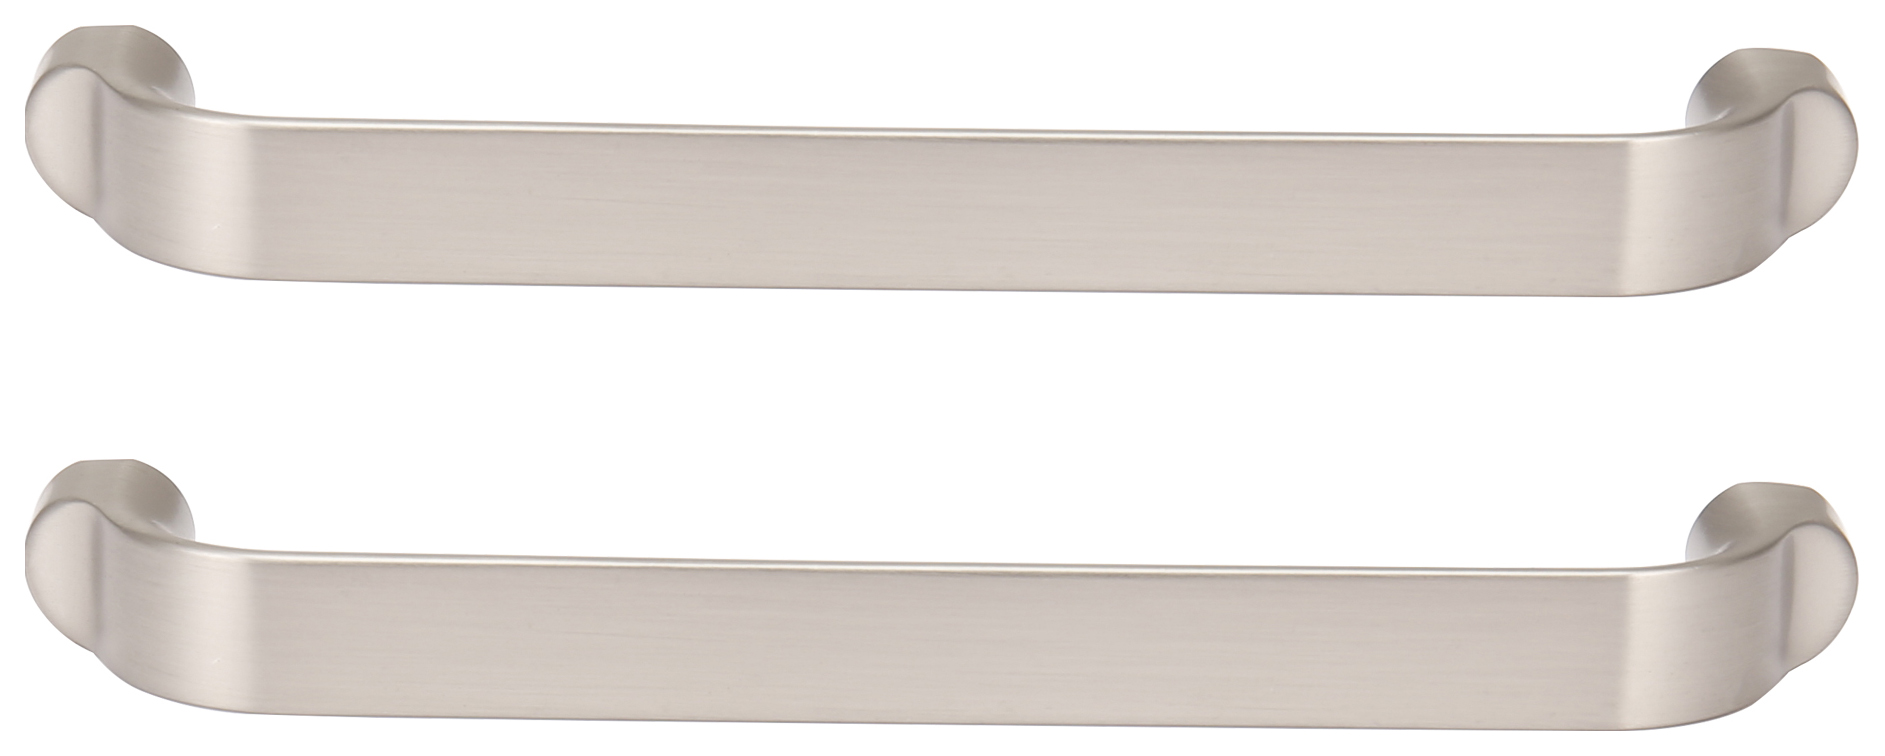 Image of Straight Cabinet Handle Satin Nickel 140mm - Pack of 2